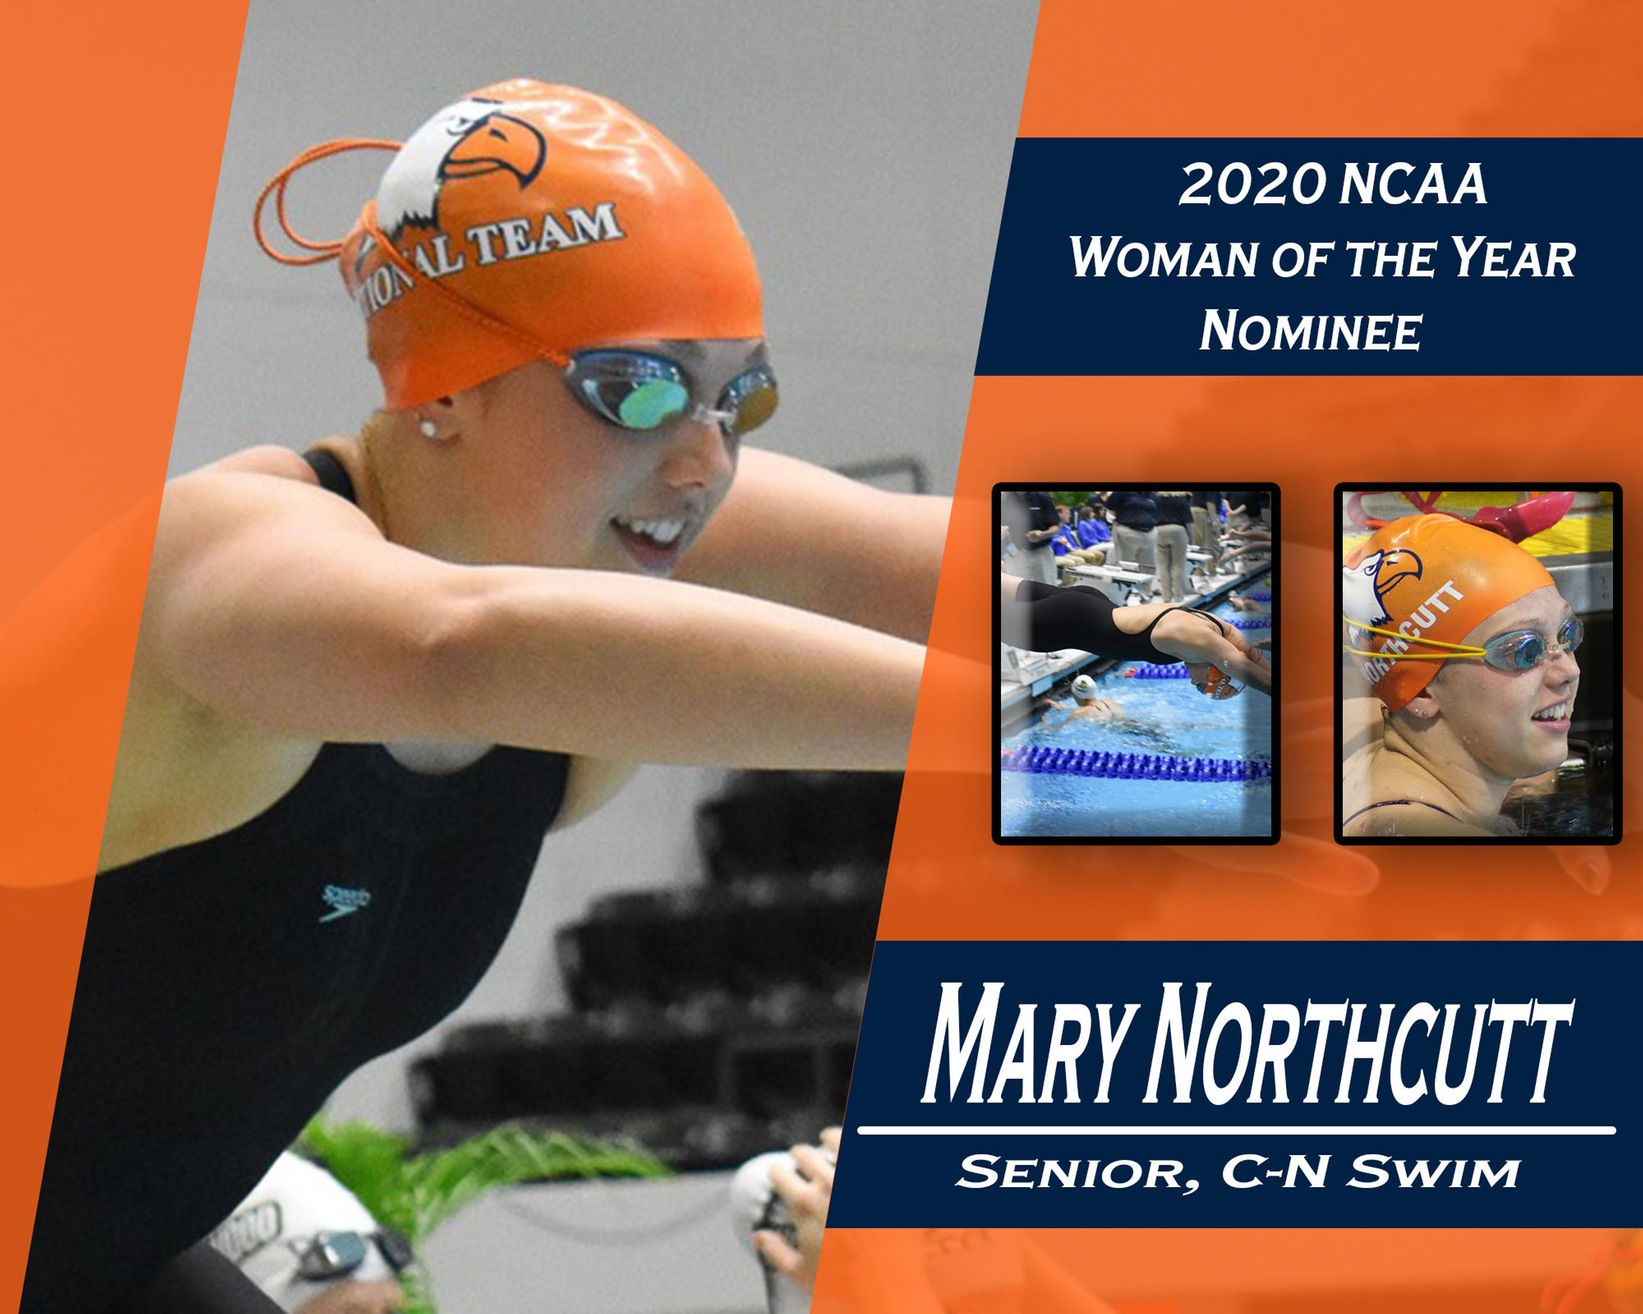 Northcutt Nominated for 2020 NCAA Woman of the Year Award